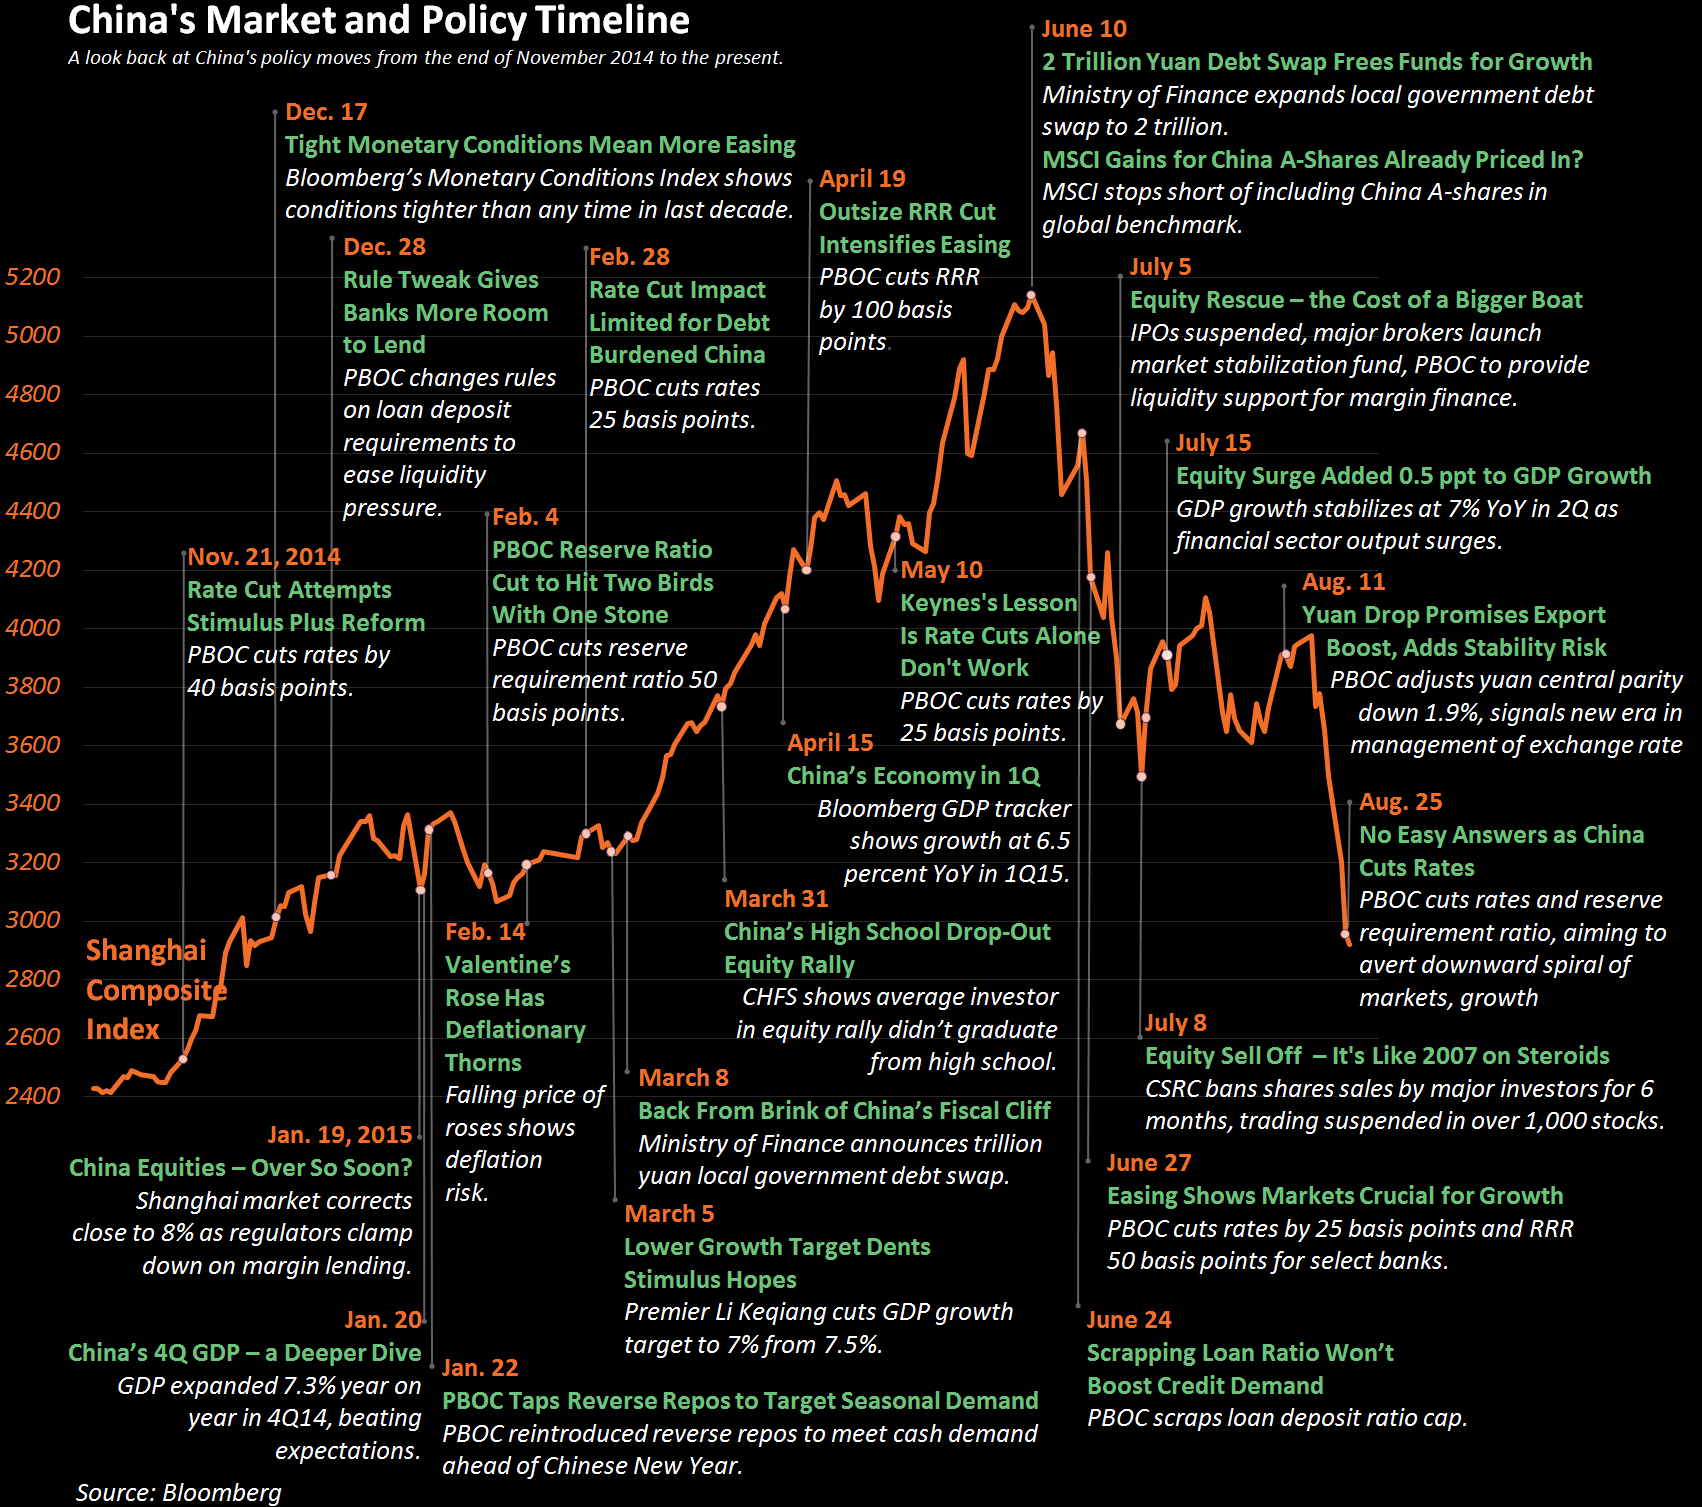 China’s Stunning Stock Market Moves in One Huge, Annotated Chart